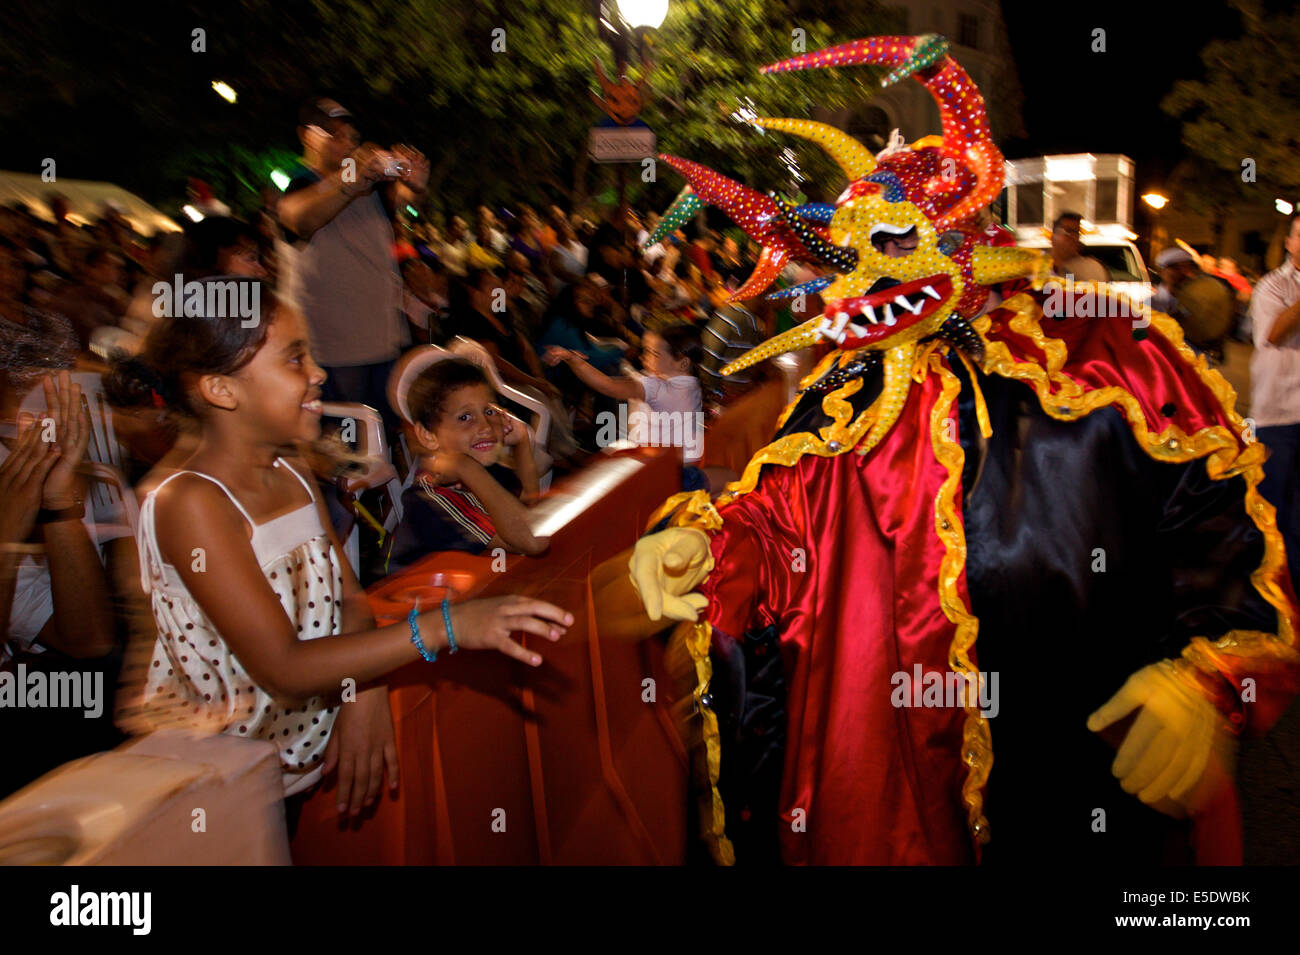 A costumed reveler called a vejigante greets children during the final night of parades during the Carnaval de Ponce February 21, 2009 in Ponce, Puerto Rico. Vejigantes are a folkloric character representing the devil. Stock Photo